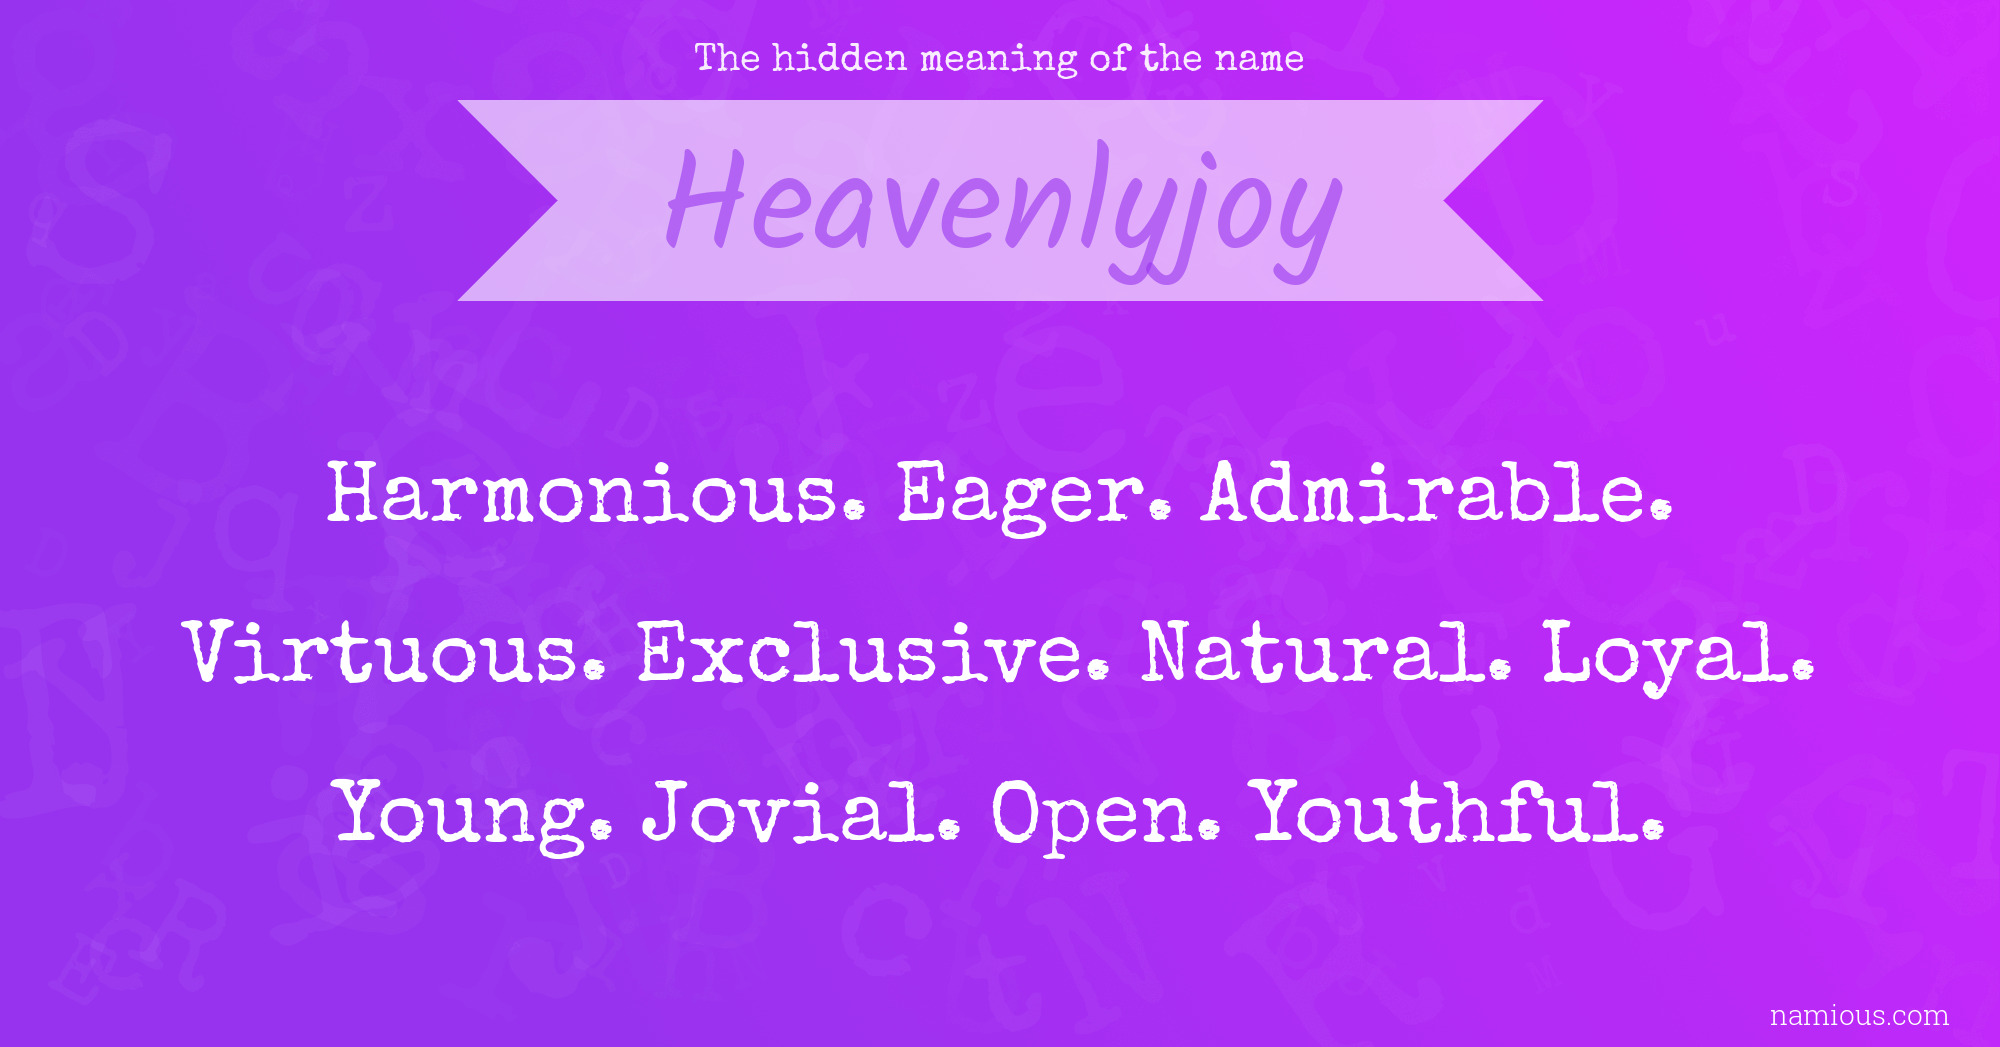 The hidden meaning of the name Heavenlyjoy